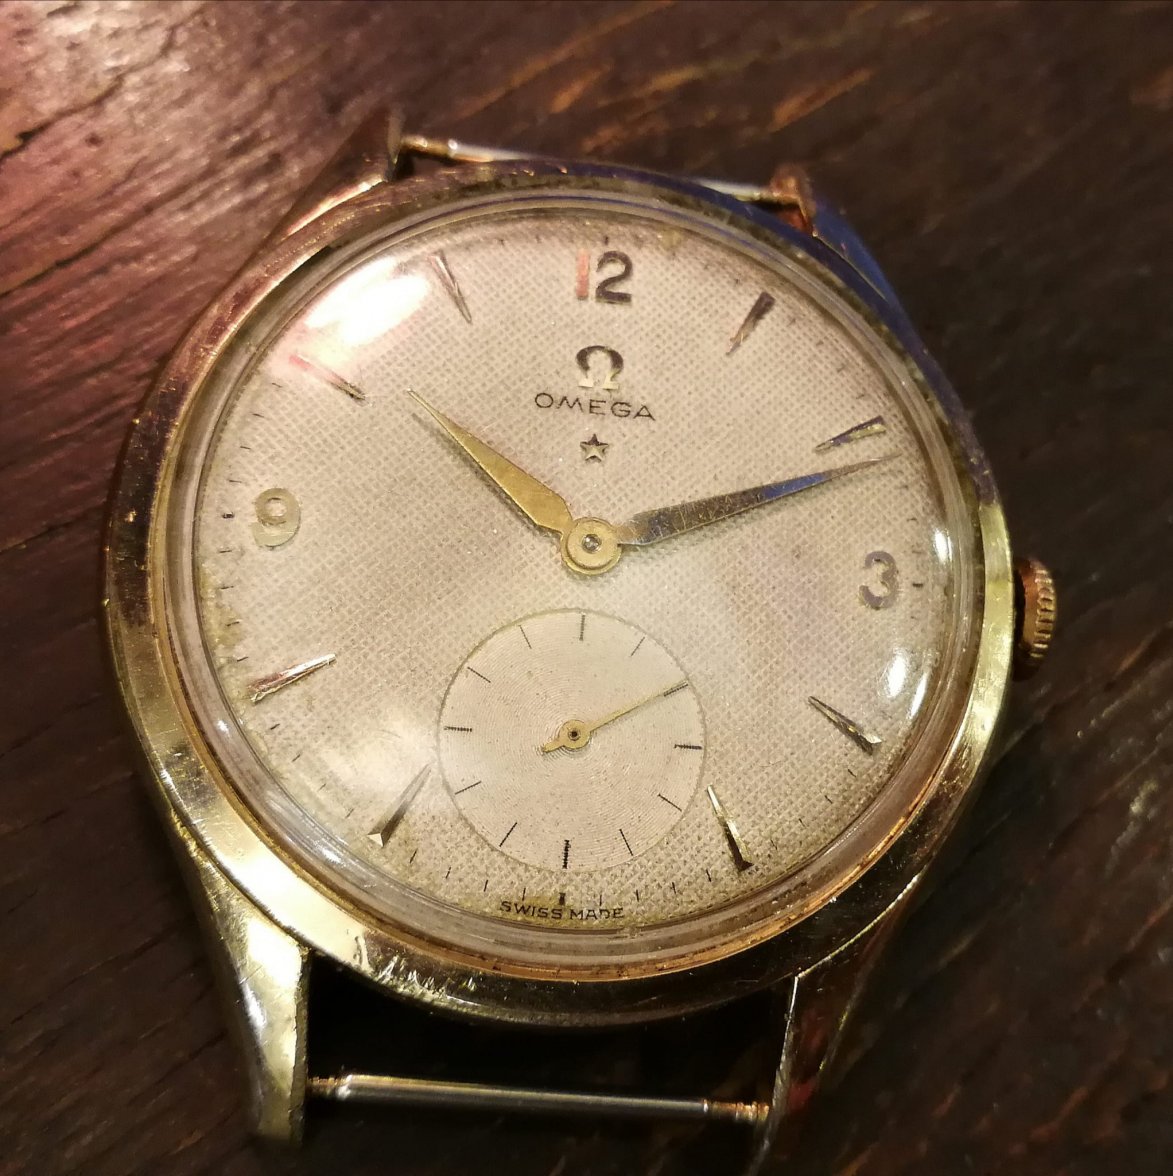 Looking for information on a 1940s 40mm Omega 